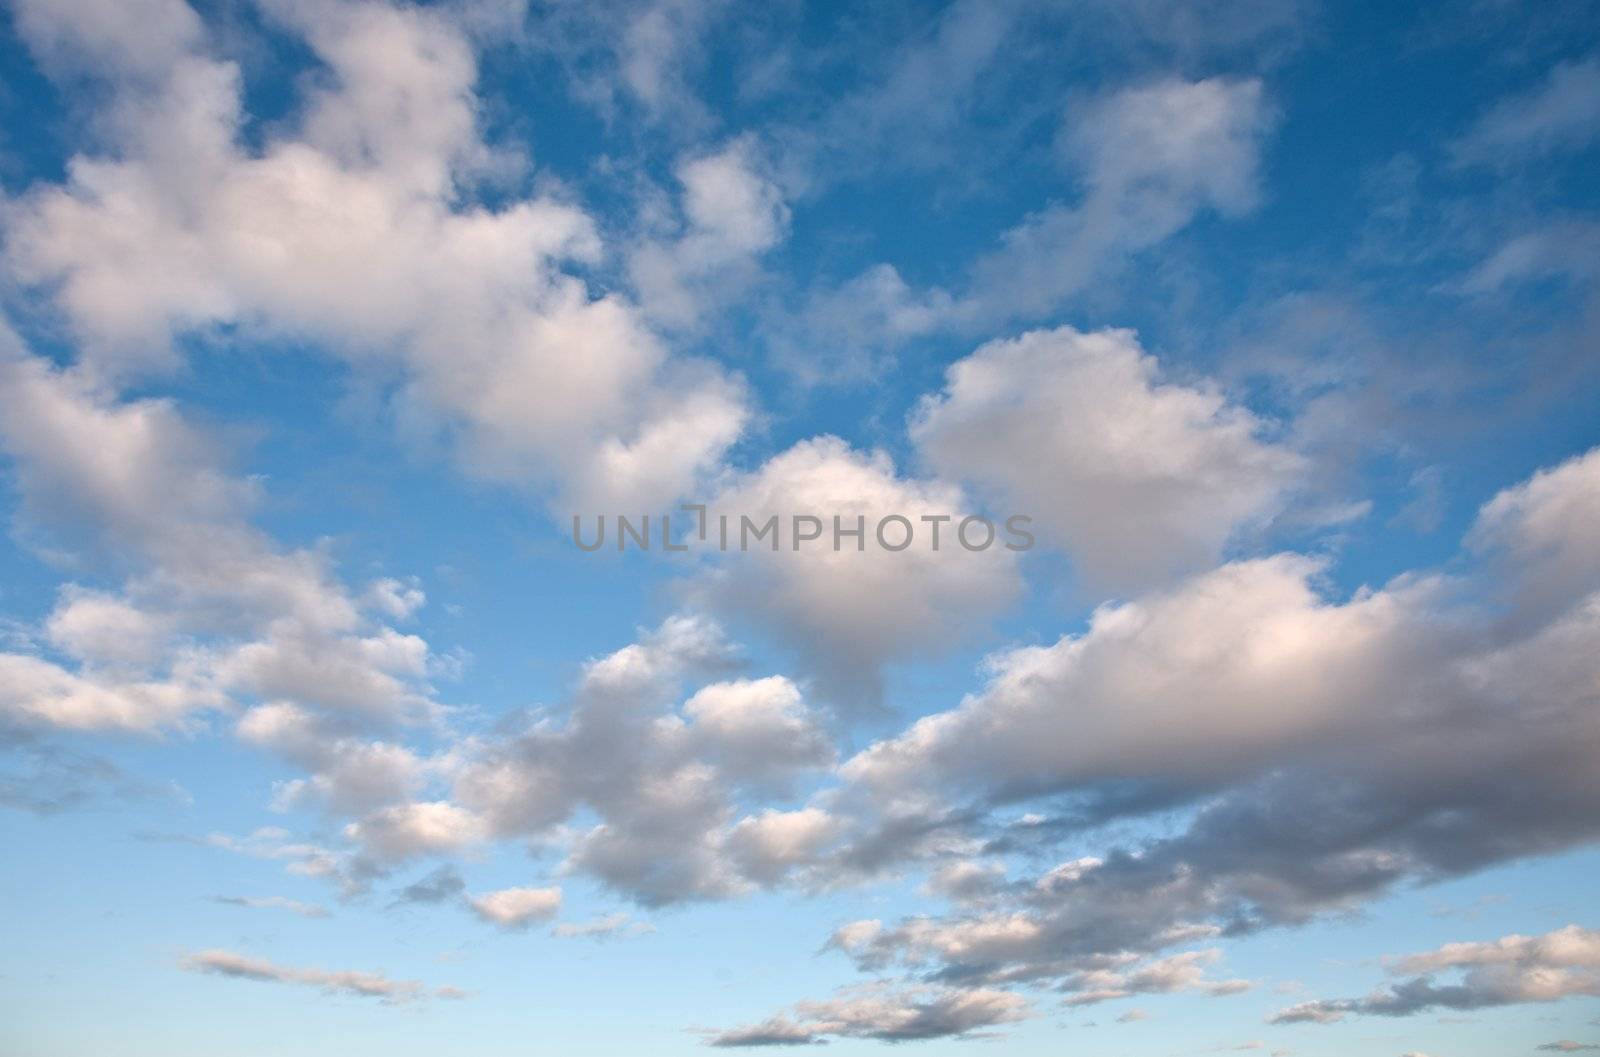 Very beautiful clouds in the blue sky